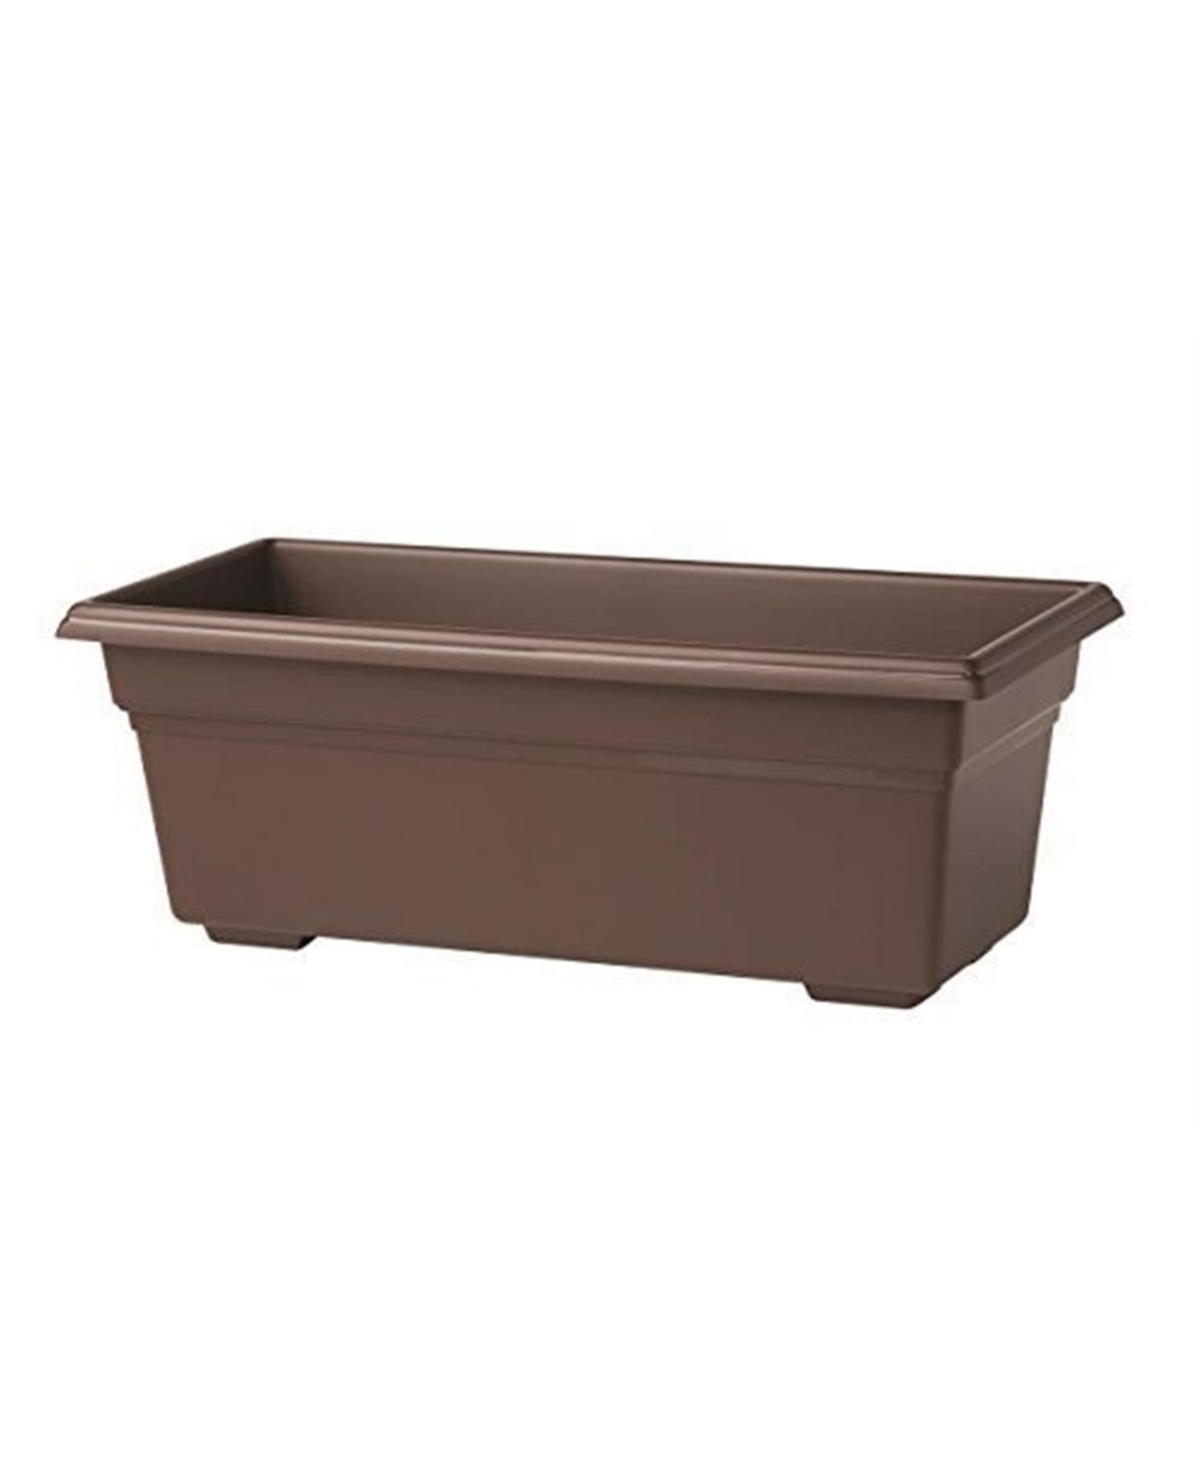 Countryside Flower Box, 30 Inch, Brown - Brown